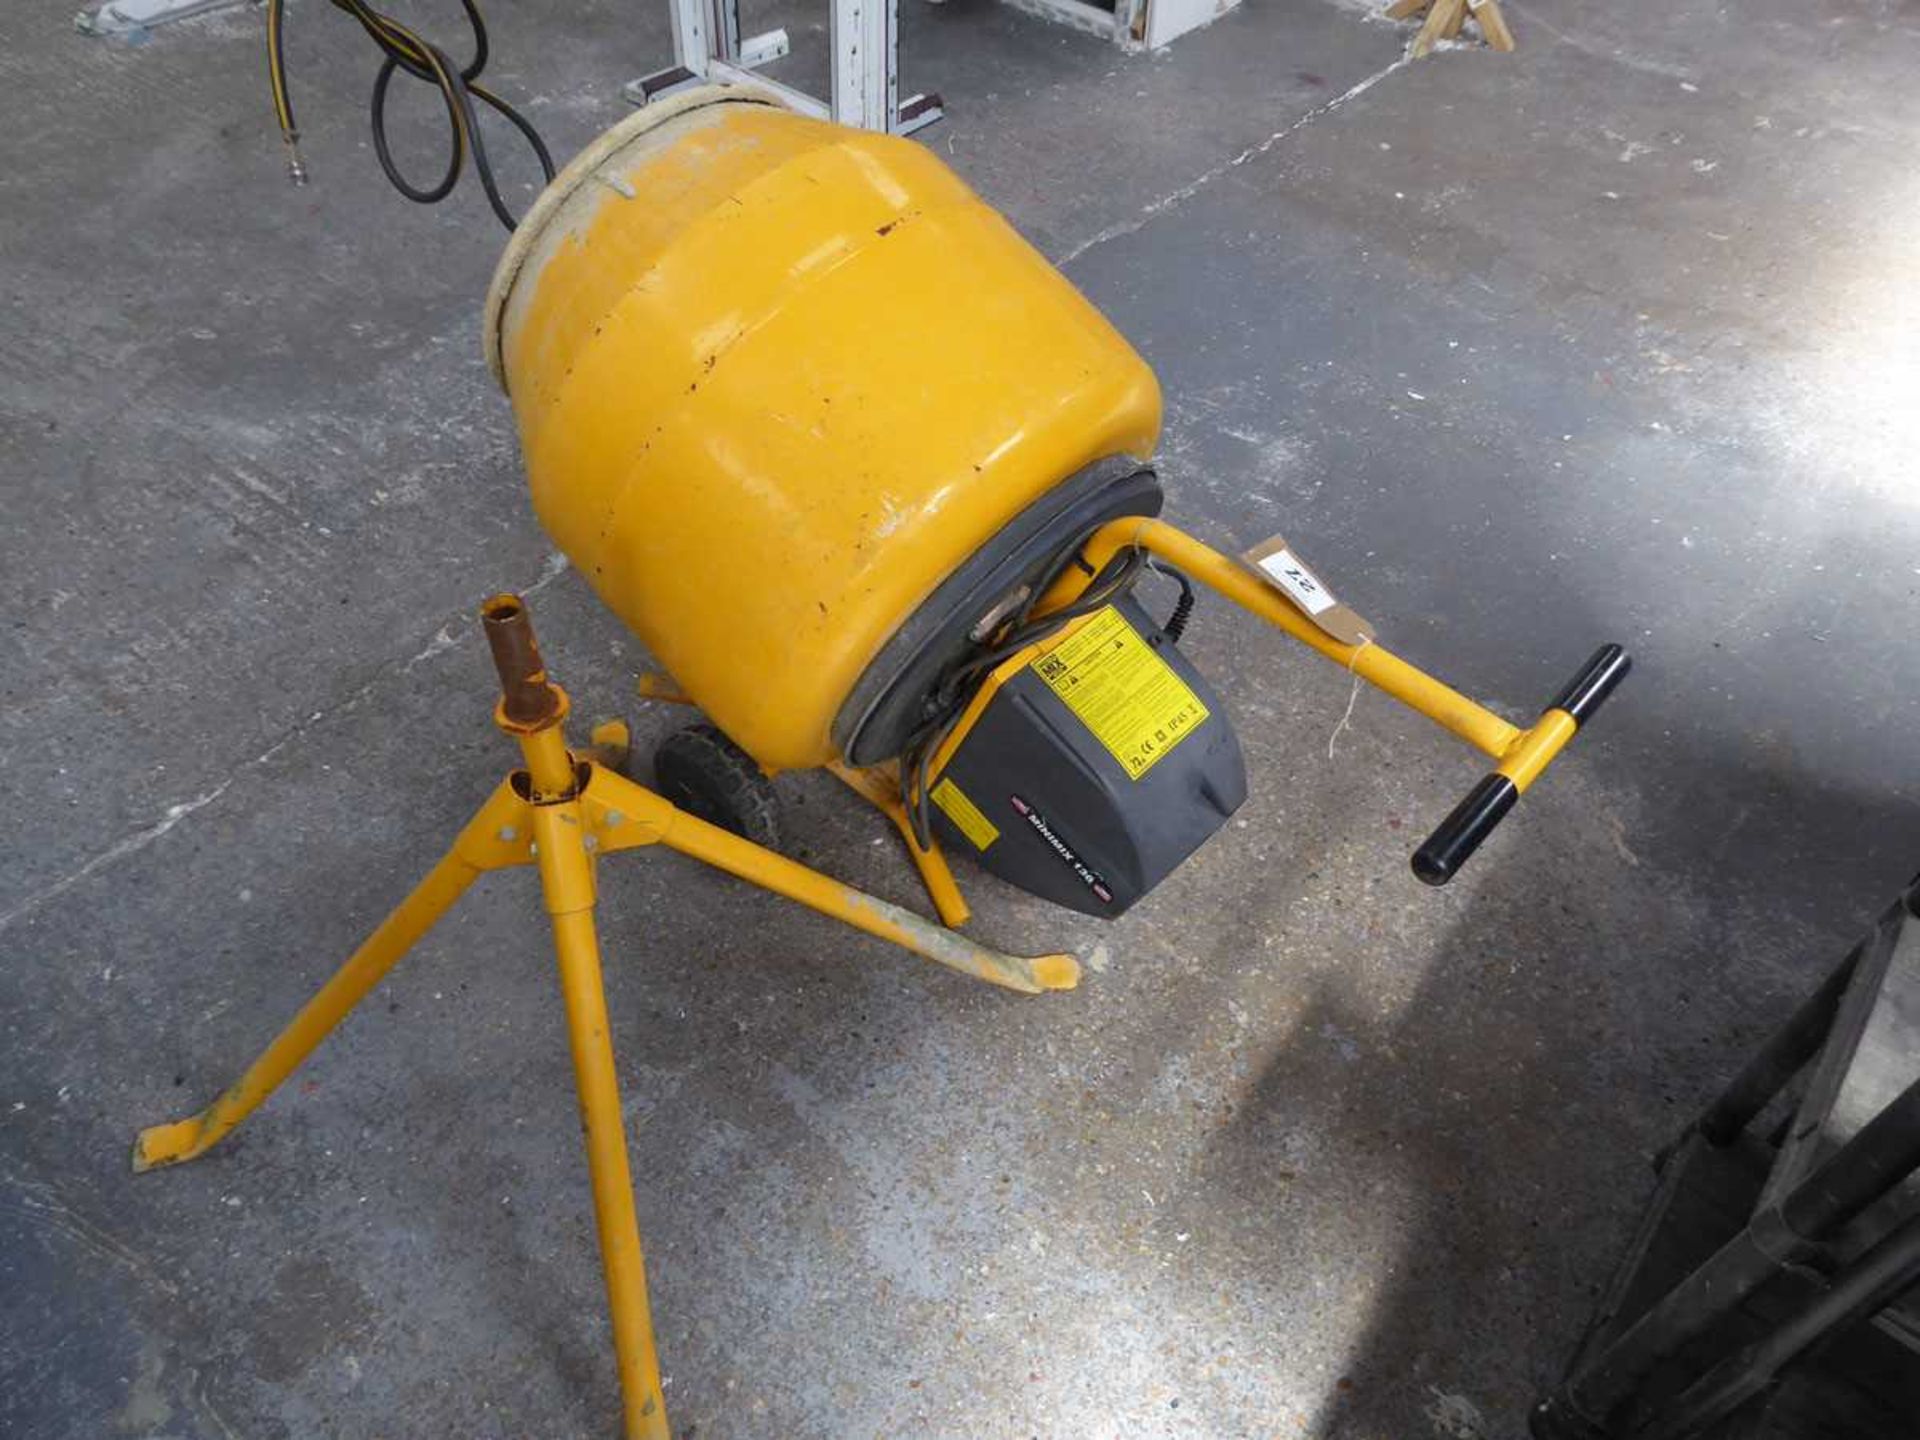 Altrad Belle Minimix 130 single phase electric half bag cement mixer with stand - Image 3 of 3